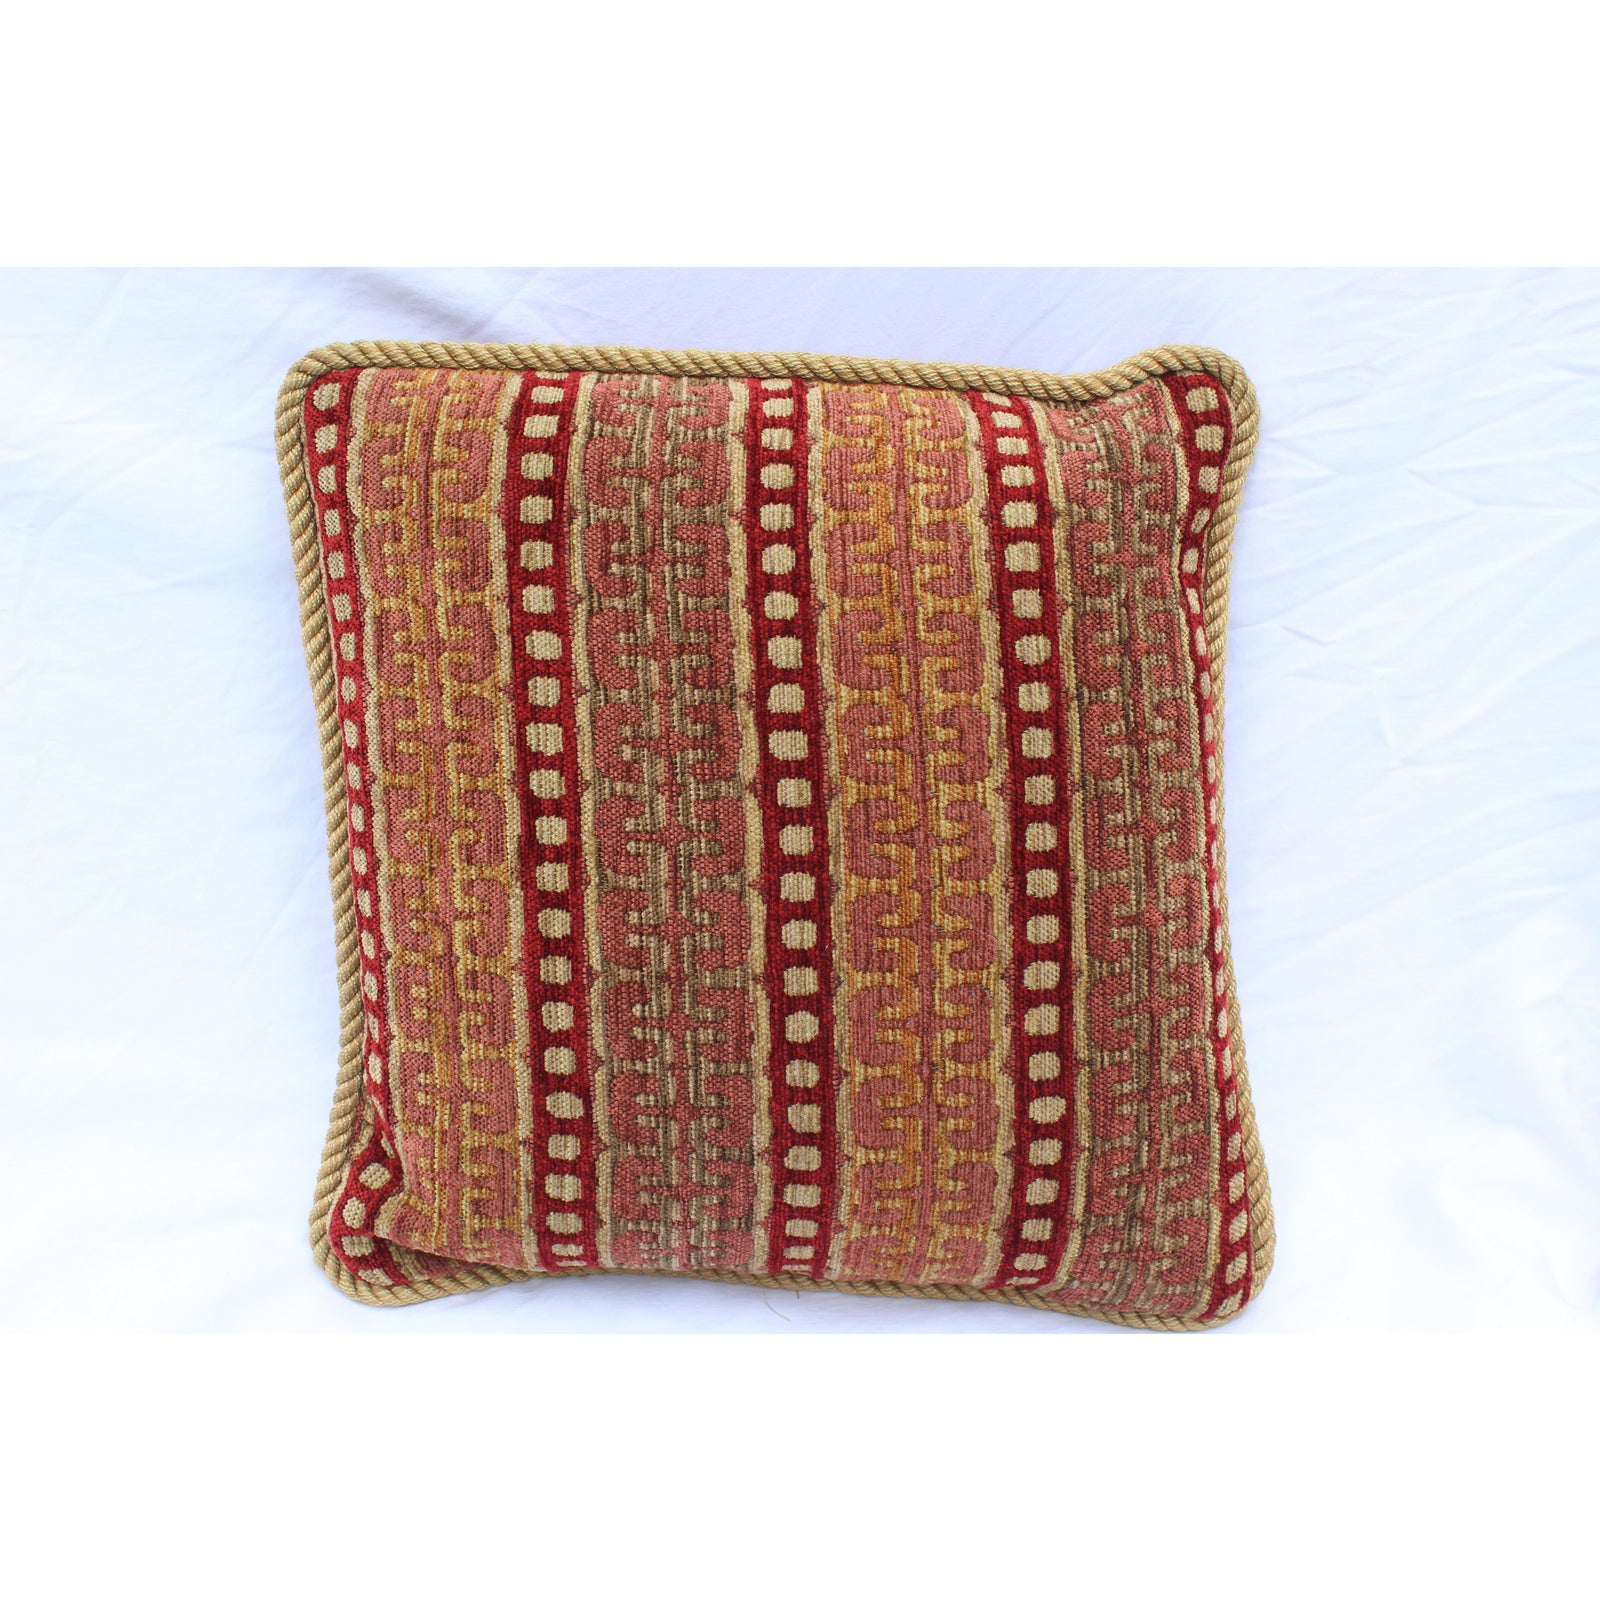 20th-century-contemporary-back-support-pillow-burgundy-and-gold-upholstered-decorative-pillow-7247